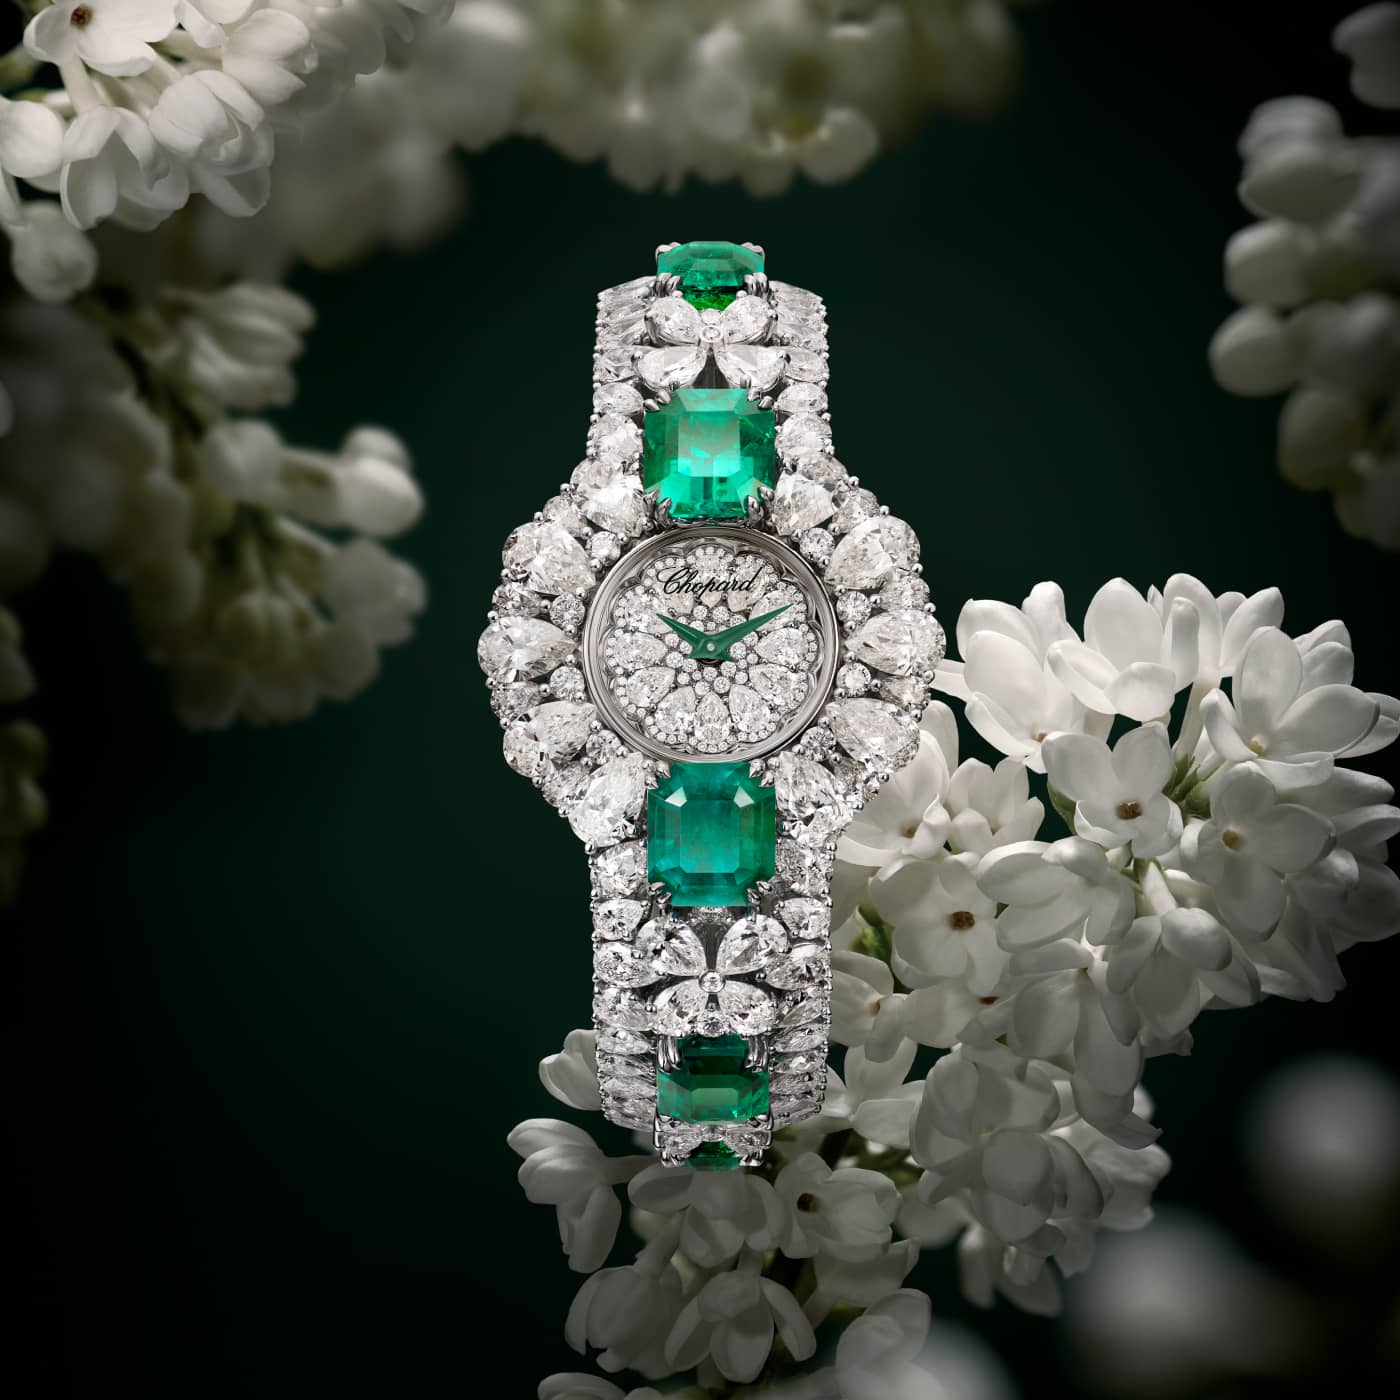 Chopard High Jewellery watch in fairmined-certified ethical 18-kt white gold set with 21.65.cts of octagonal emeralds, 25.87.cts of pear-shaped diamonds and 2.43-cts of brilliant-cut diamonds 